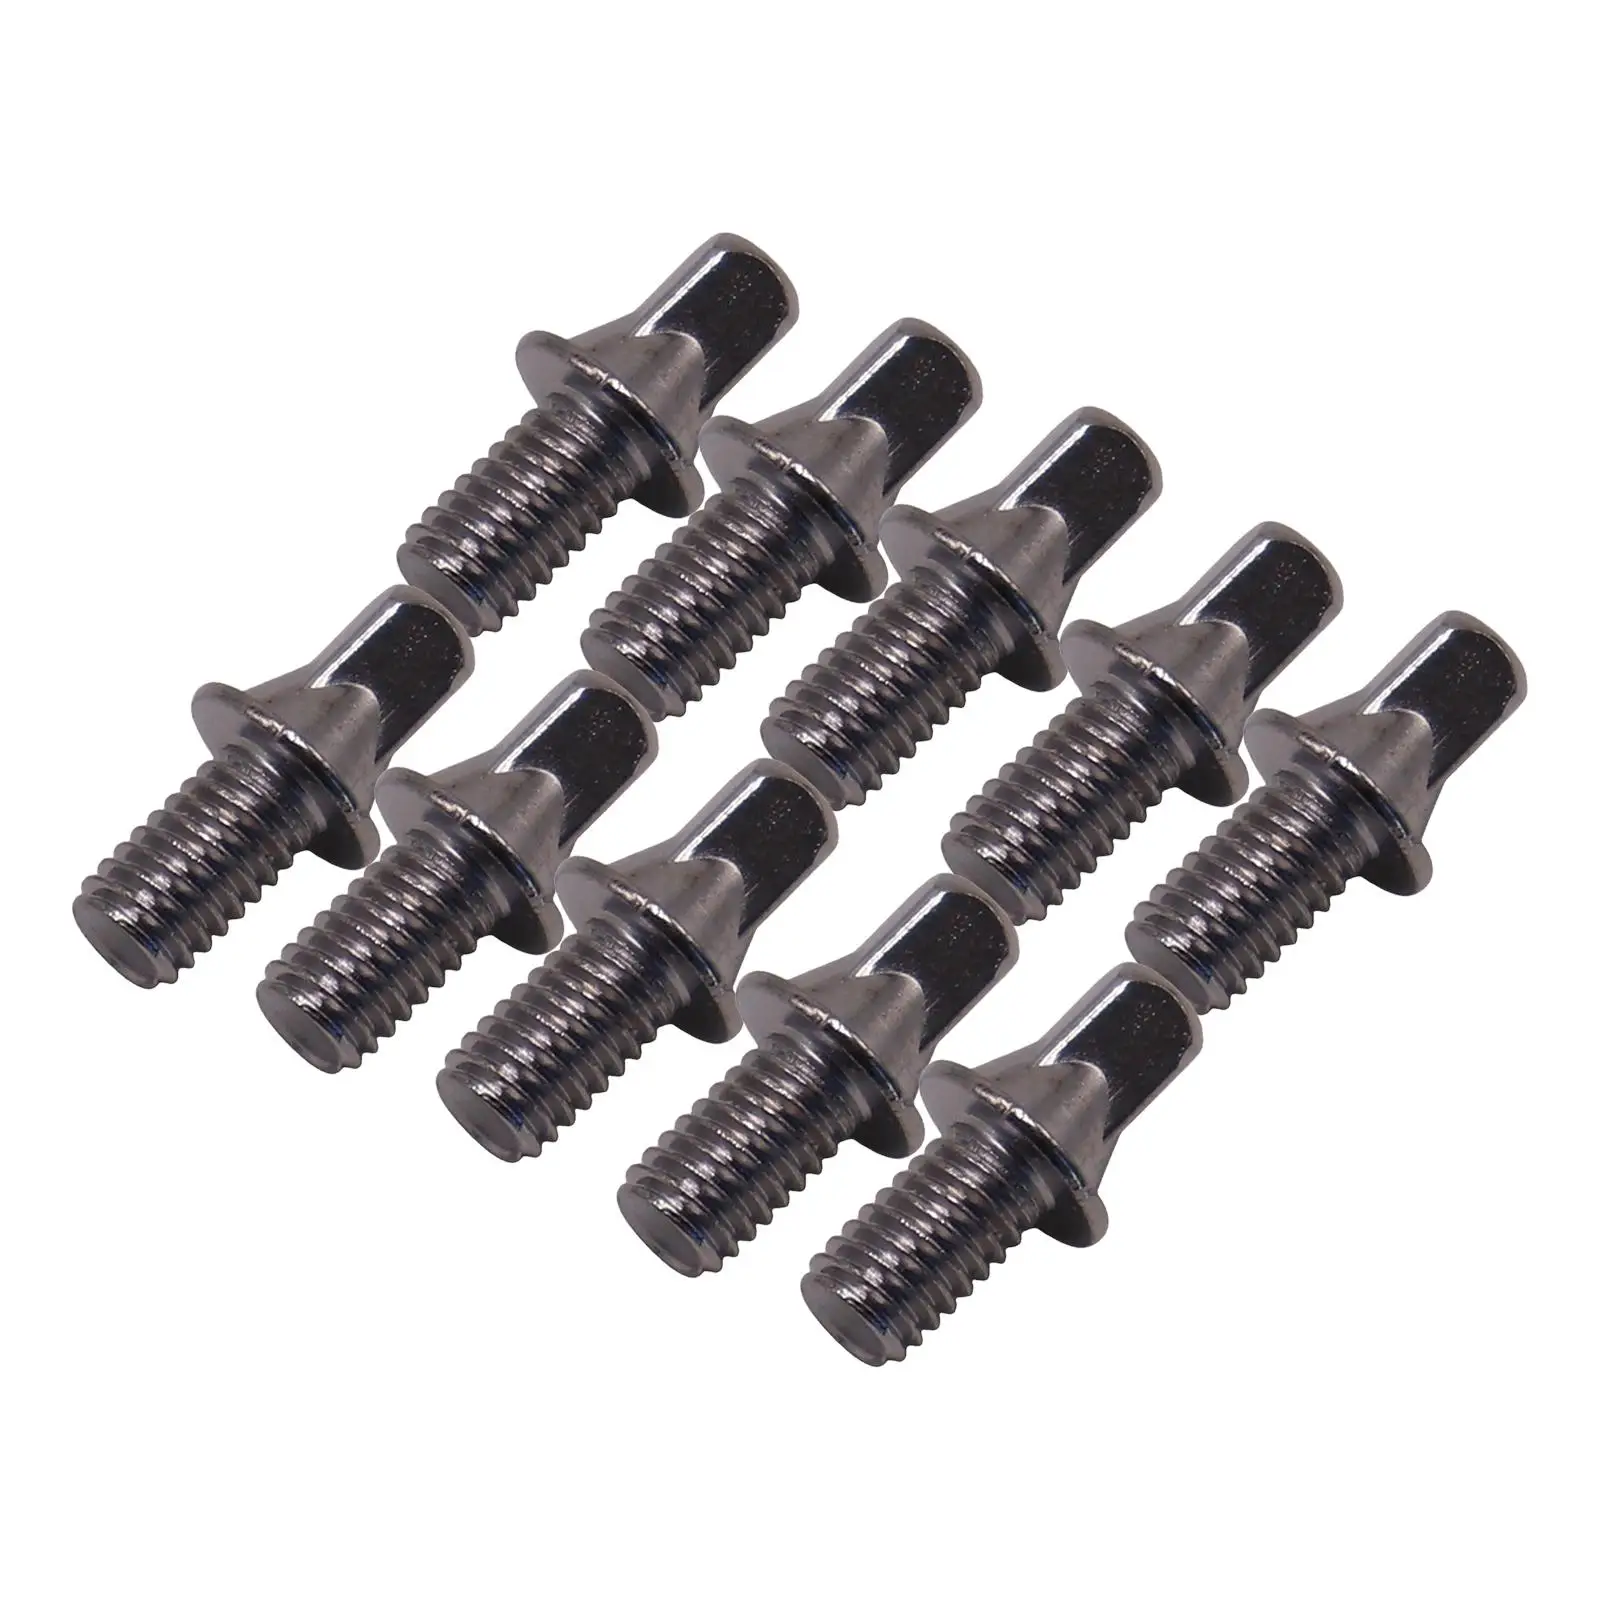 10Pcs Drum Tension Rods Durable Strong Rustproof Metal Tight Screw for Snare Drum Percussion Instrument Accessory Replaces DIY